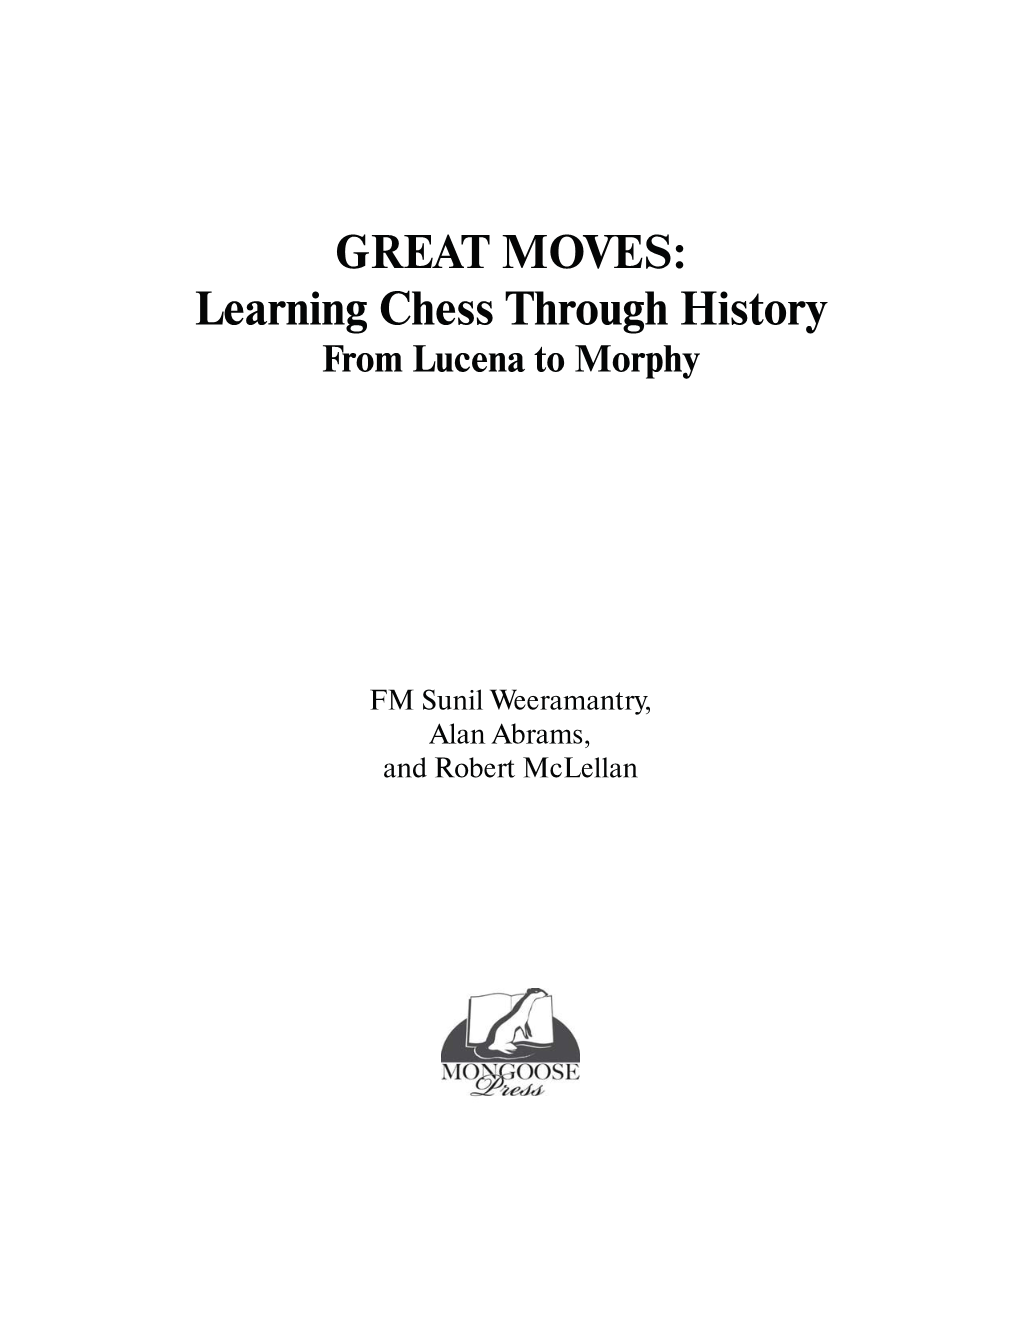 GREAT MOVES: Learning Chess Through History from Lucena to Morphy